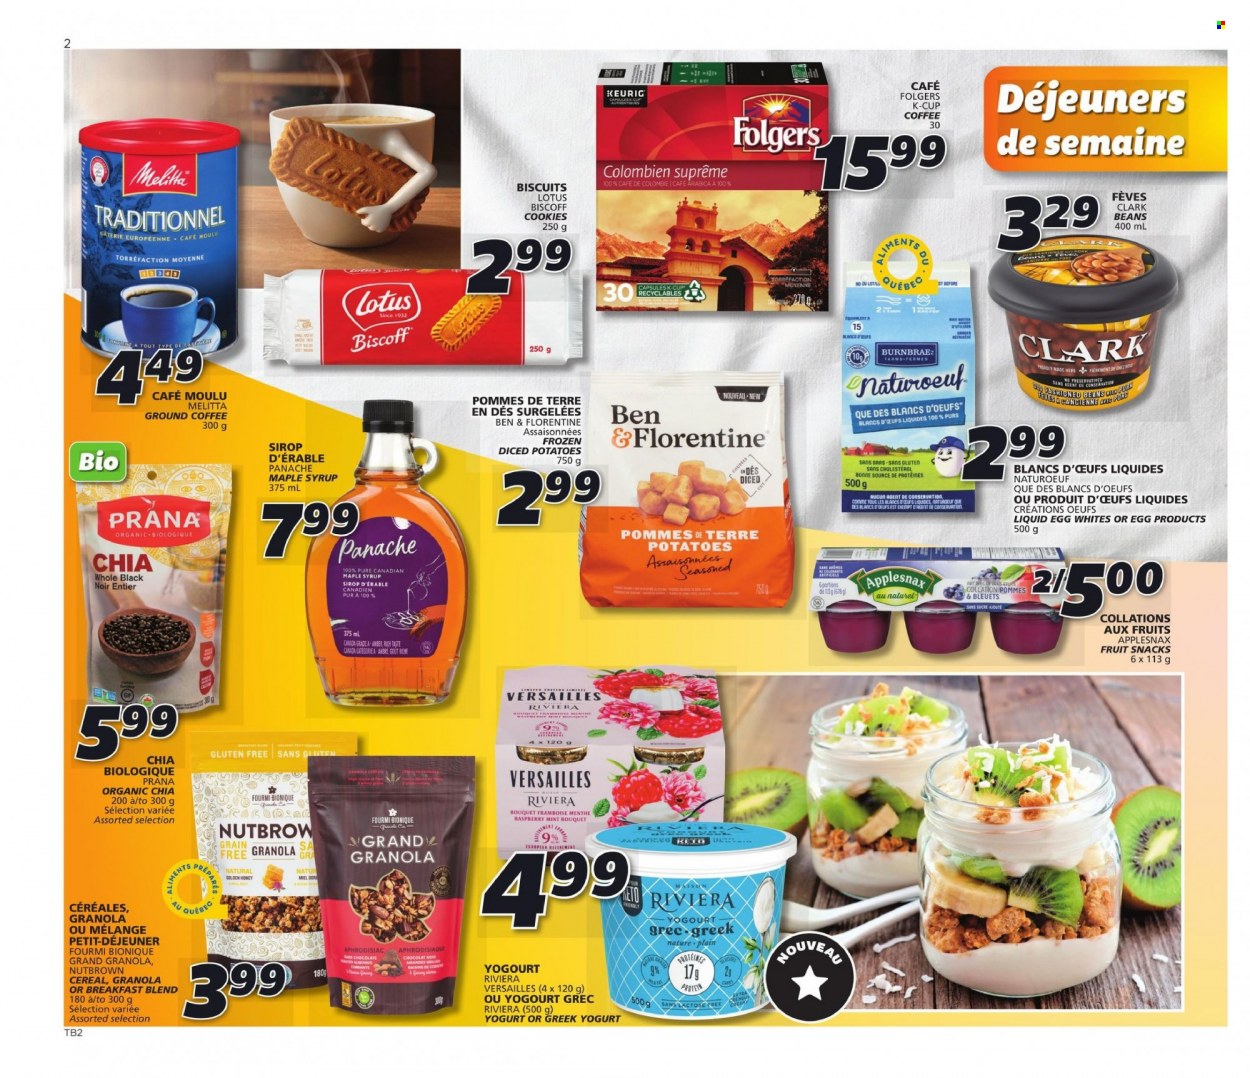 thumbnail - IGA Flyer - October 14, 2021 - October 20, 2021 - Sales products - potatoes, diced potatoes, greek yoghurt, yoghurt, cookies, biscuit, fruit snack, cereals, maple syrup, honey, syrup, coffee, Folgers, ground coffee, coffee capsules, K-Cups, Keurig, breakfast blend, granola. Page 2.